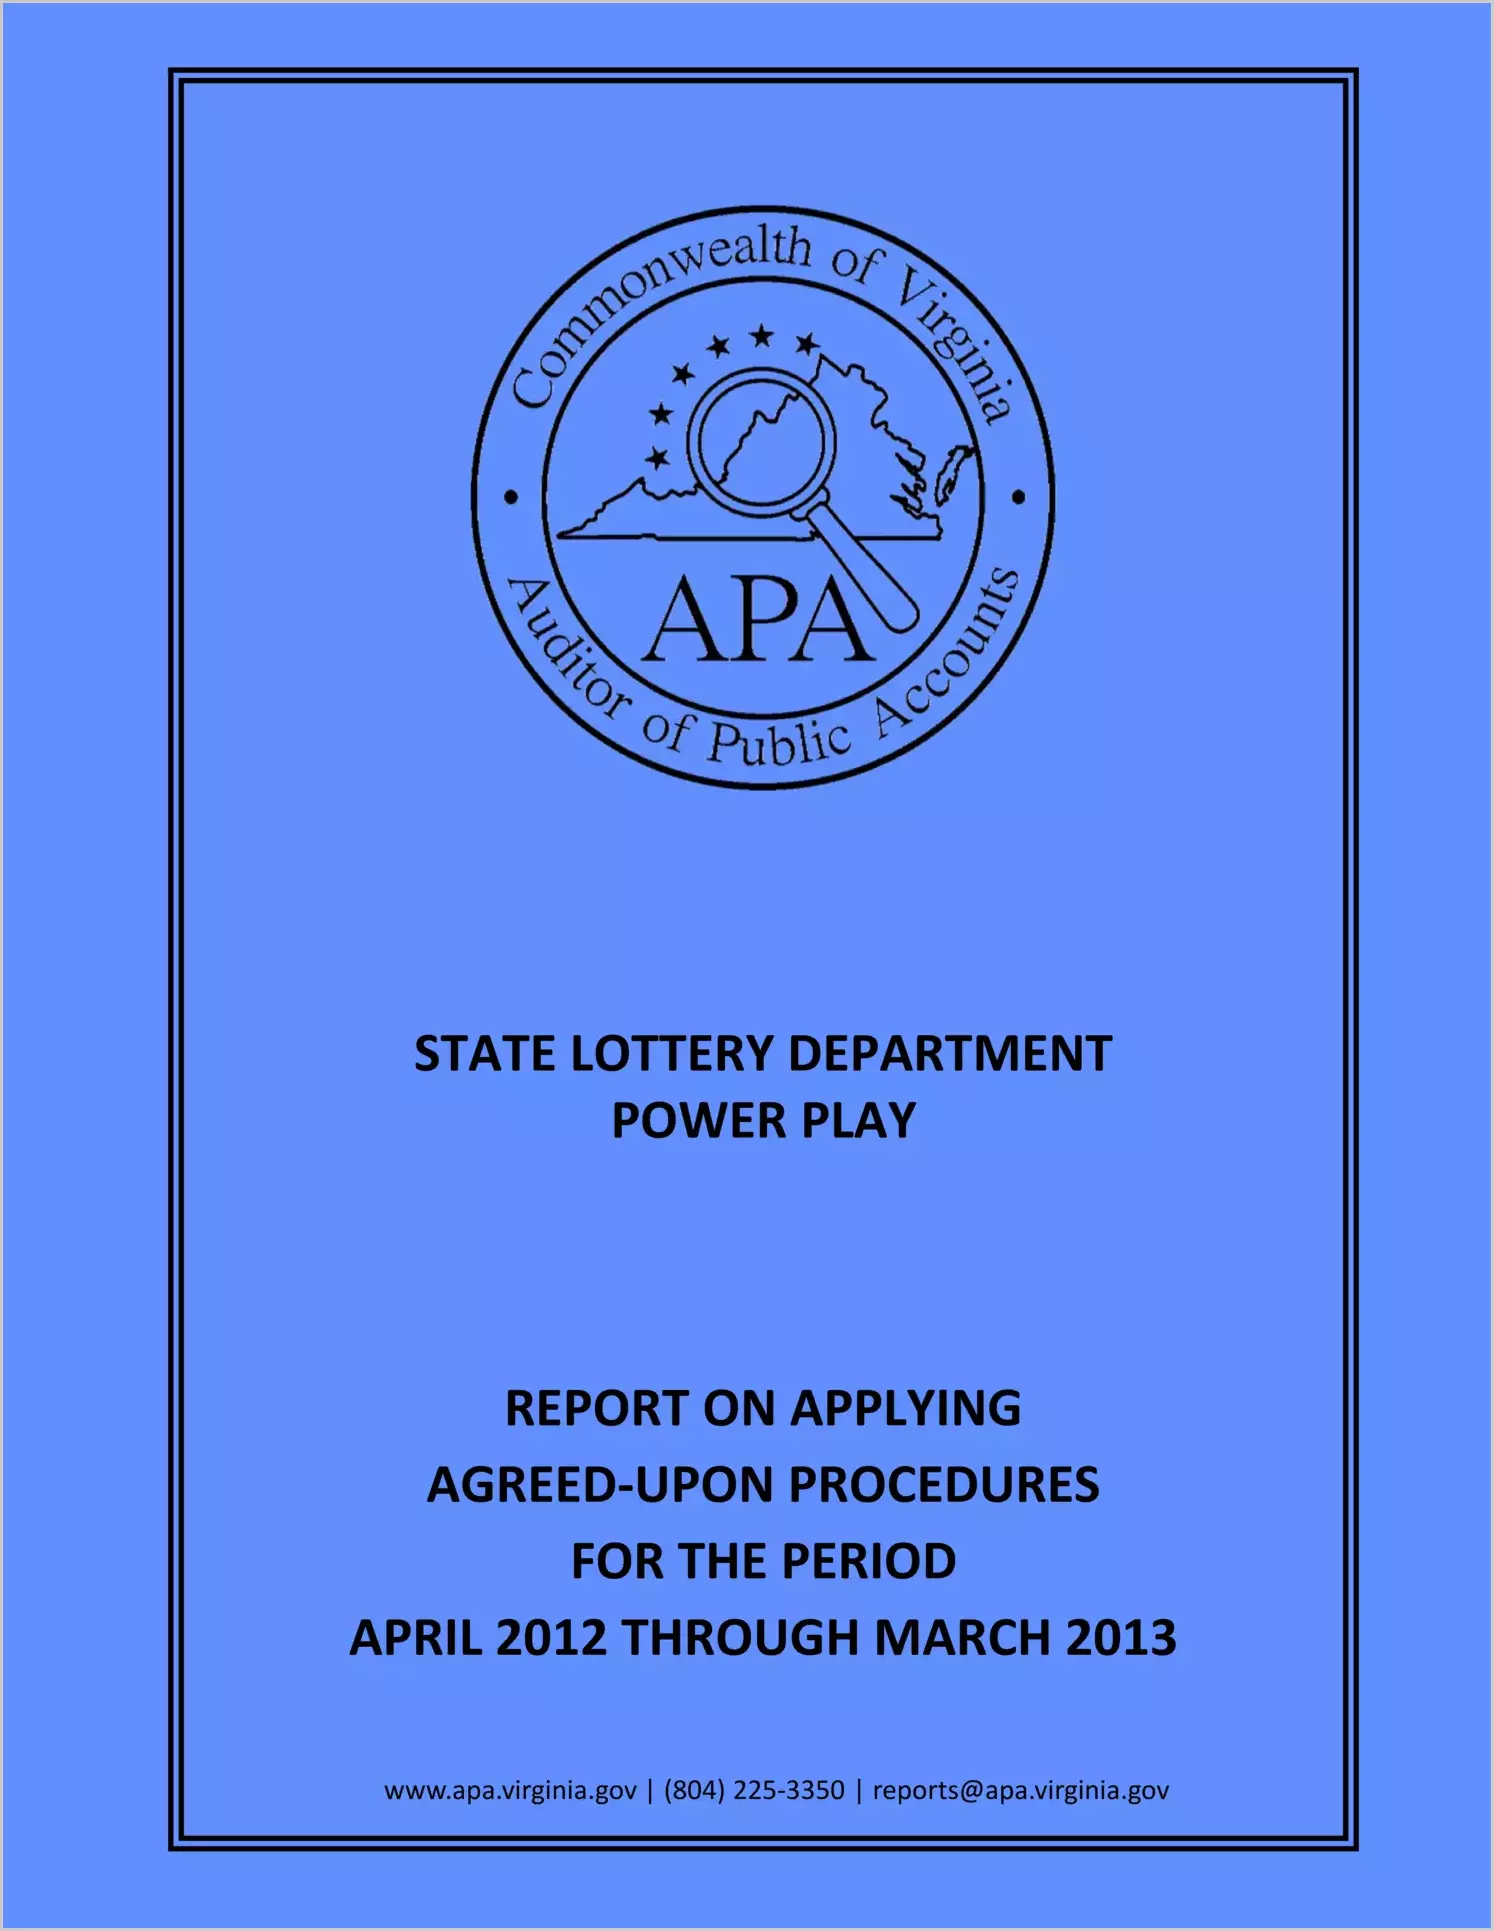 State Lottery Department Power Play report on Applying Agreed-Upon Procedures for the period April, 2012 throgh March, 2013